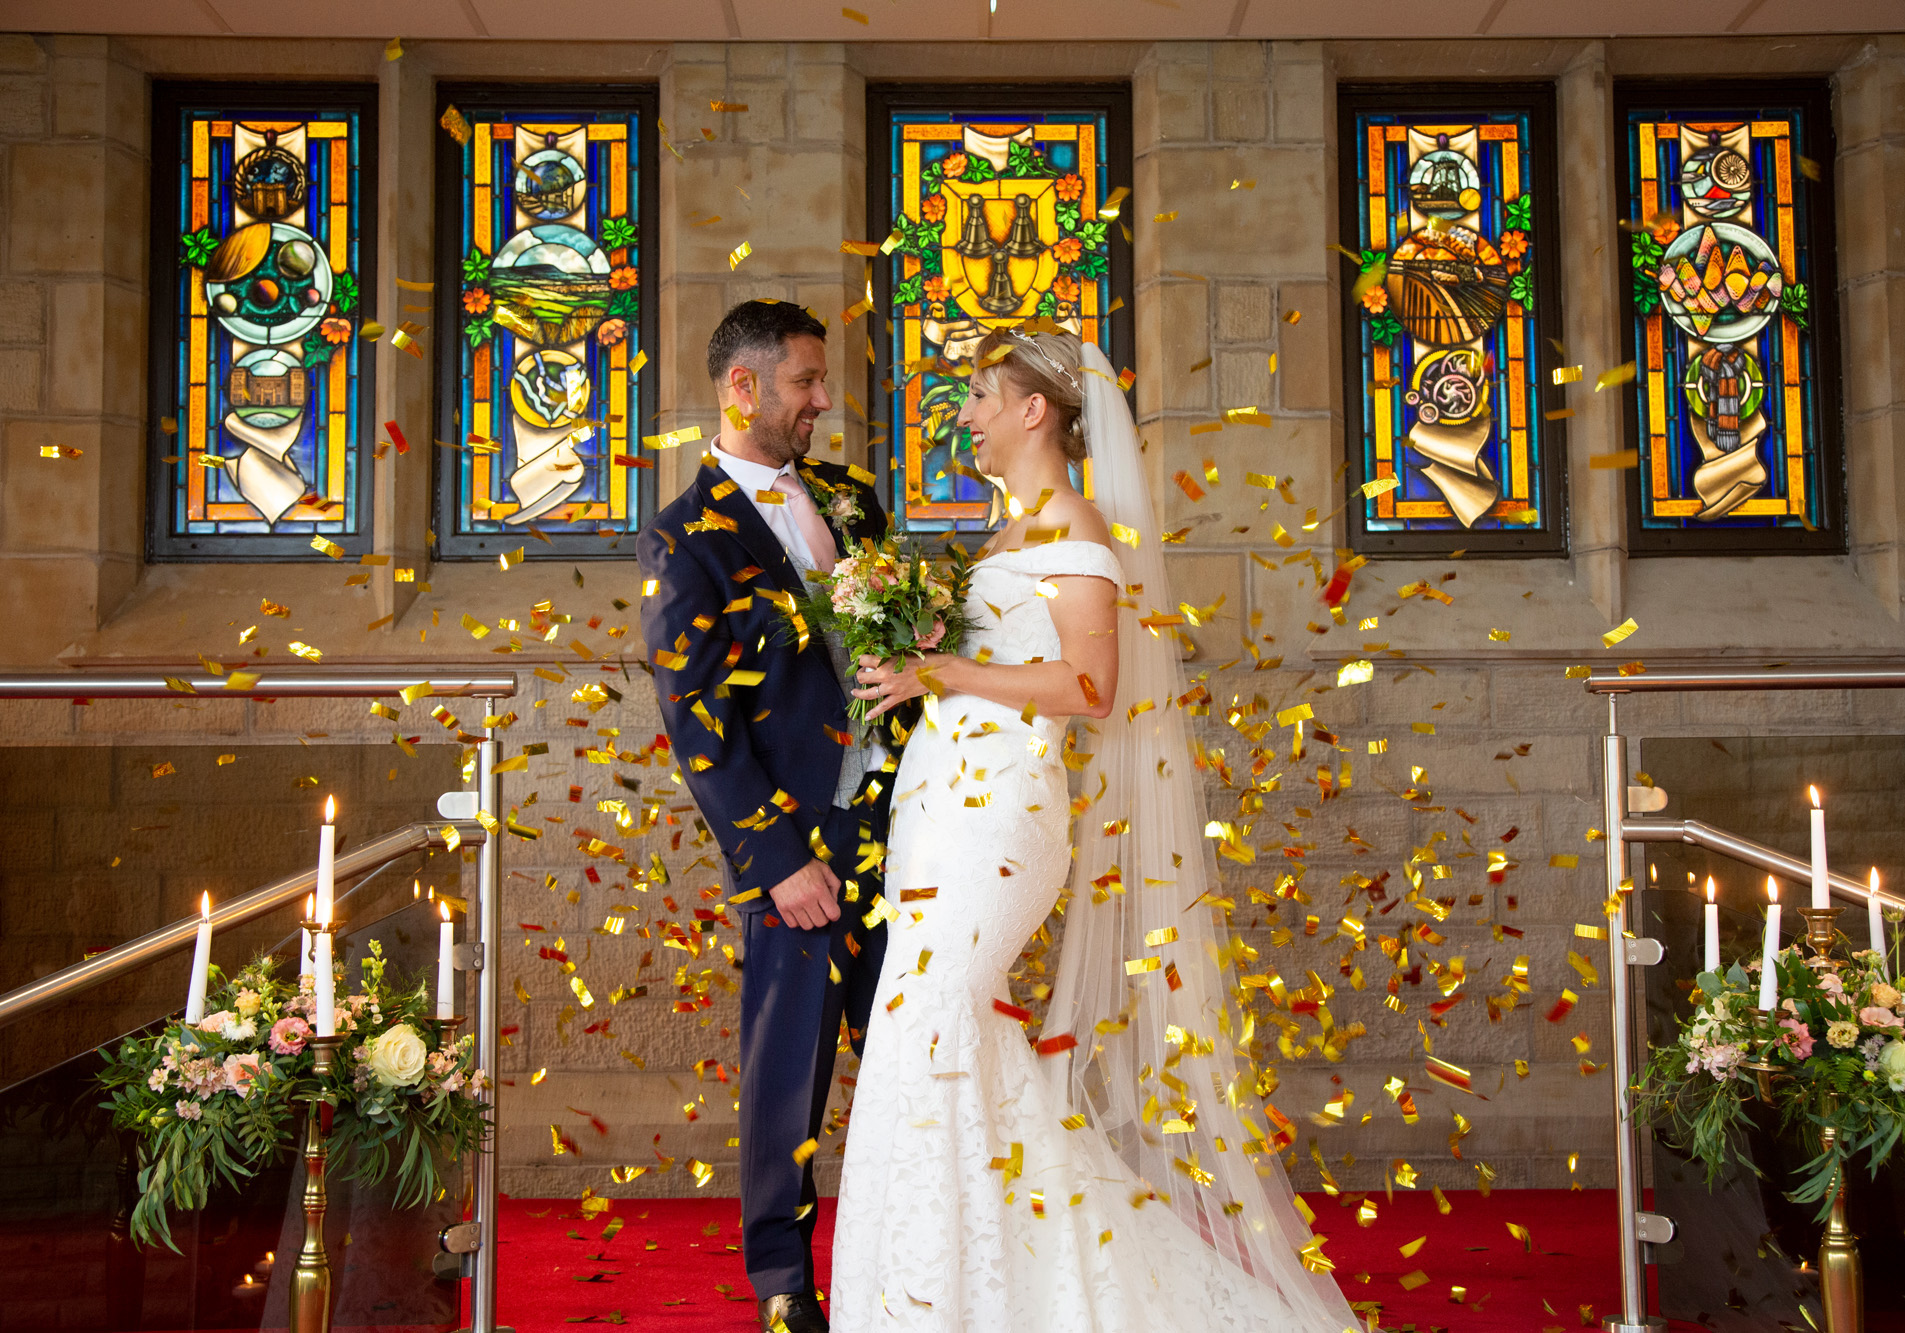 Book your Autumn wedding here at The Landmark!